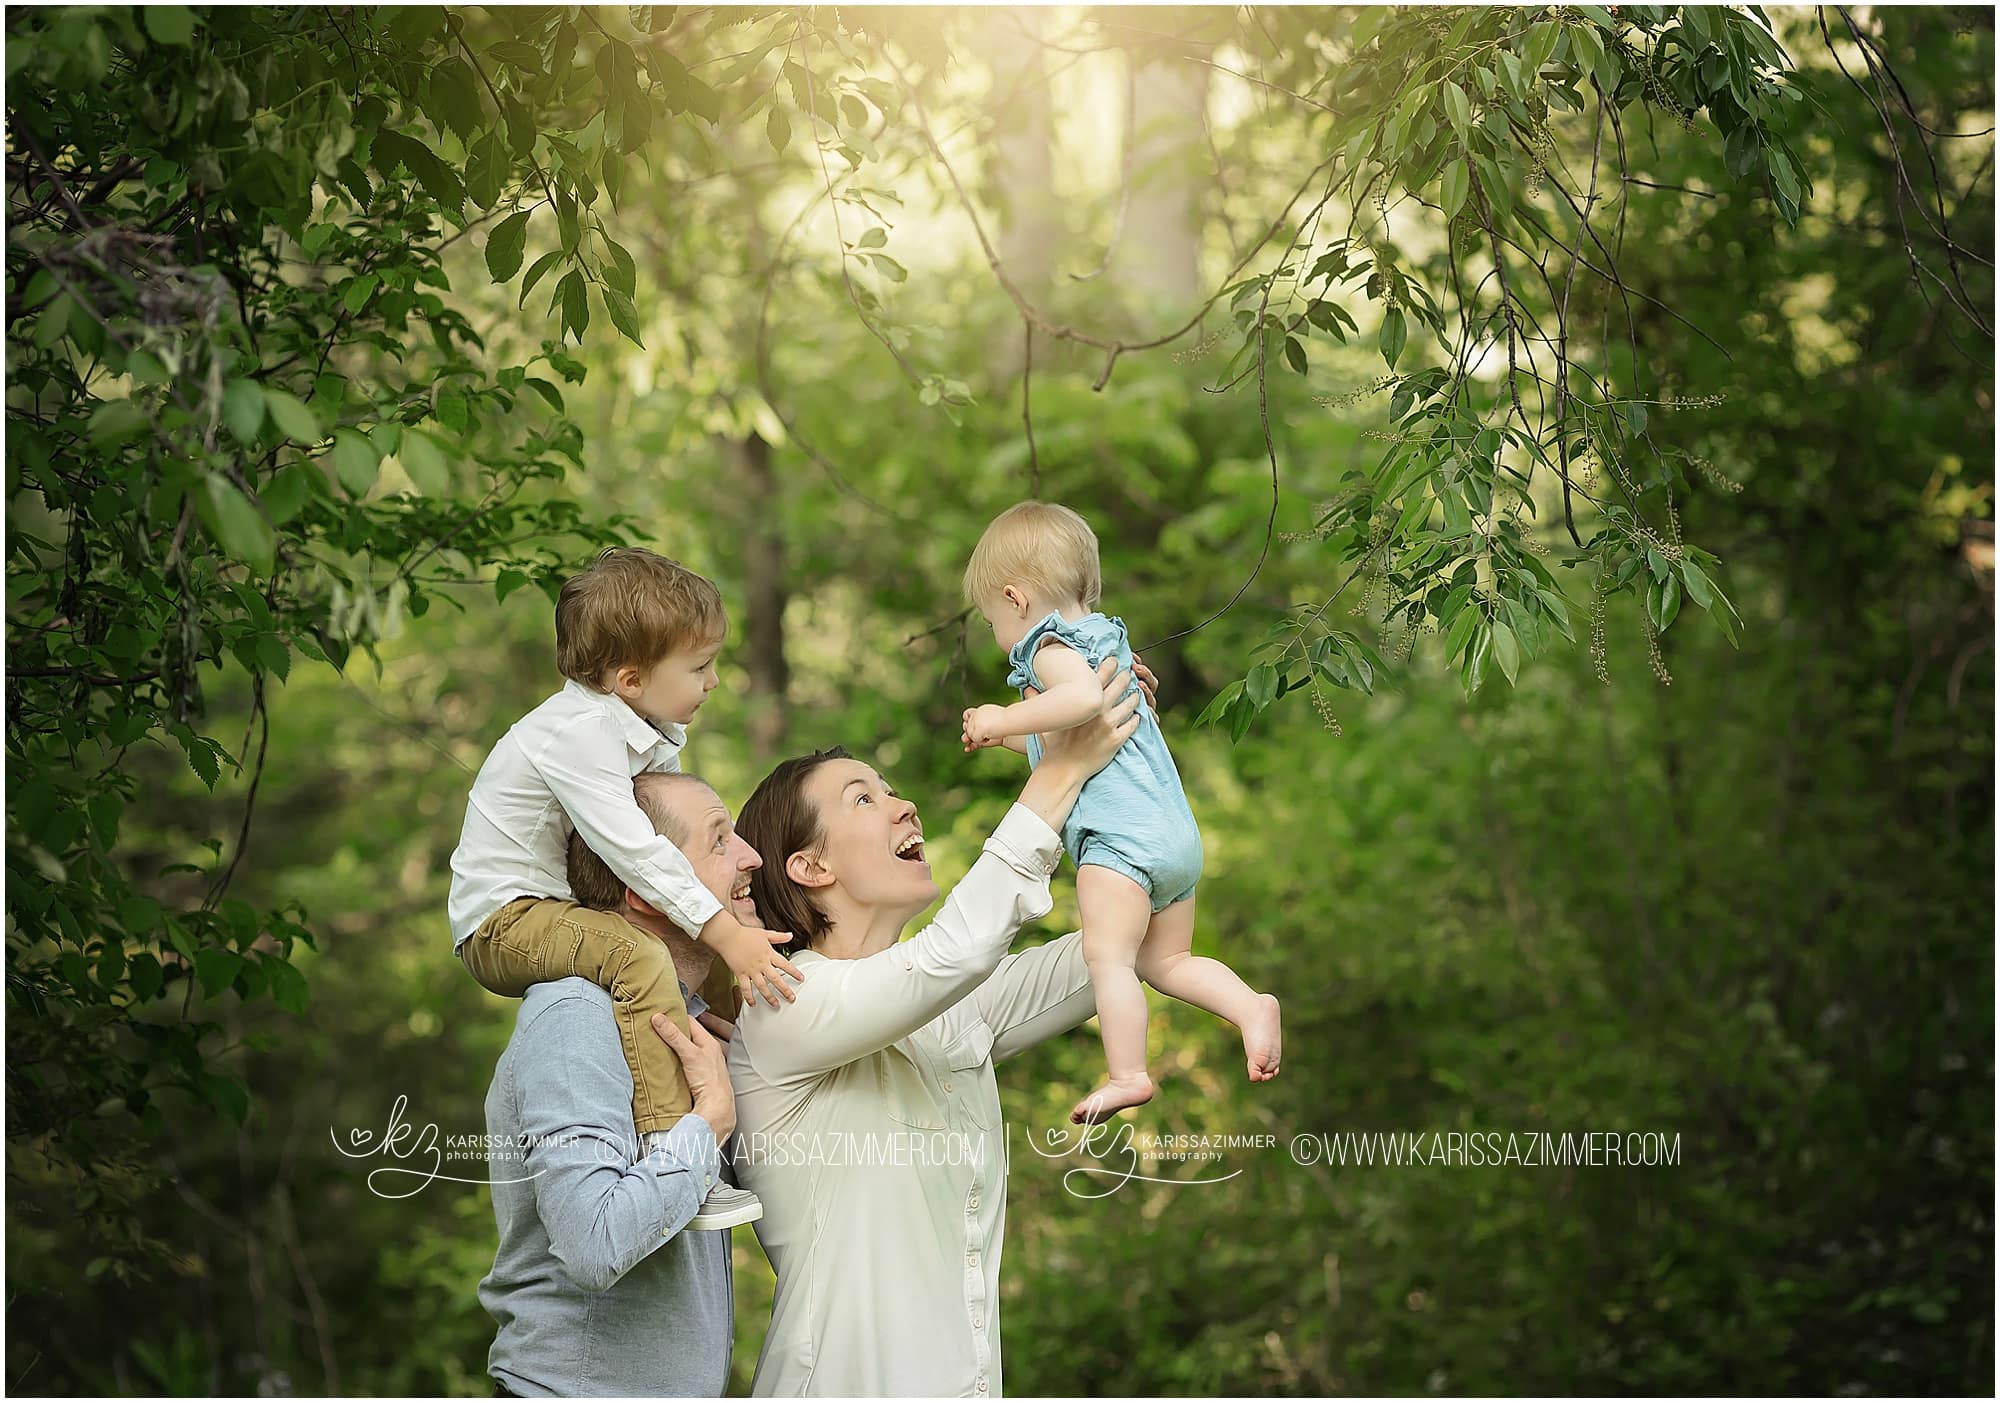 Outdoor family photography 17050